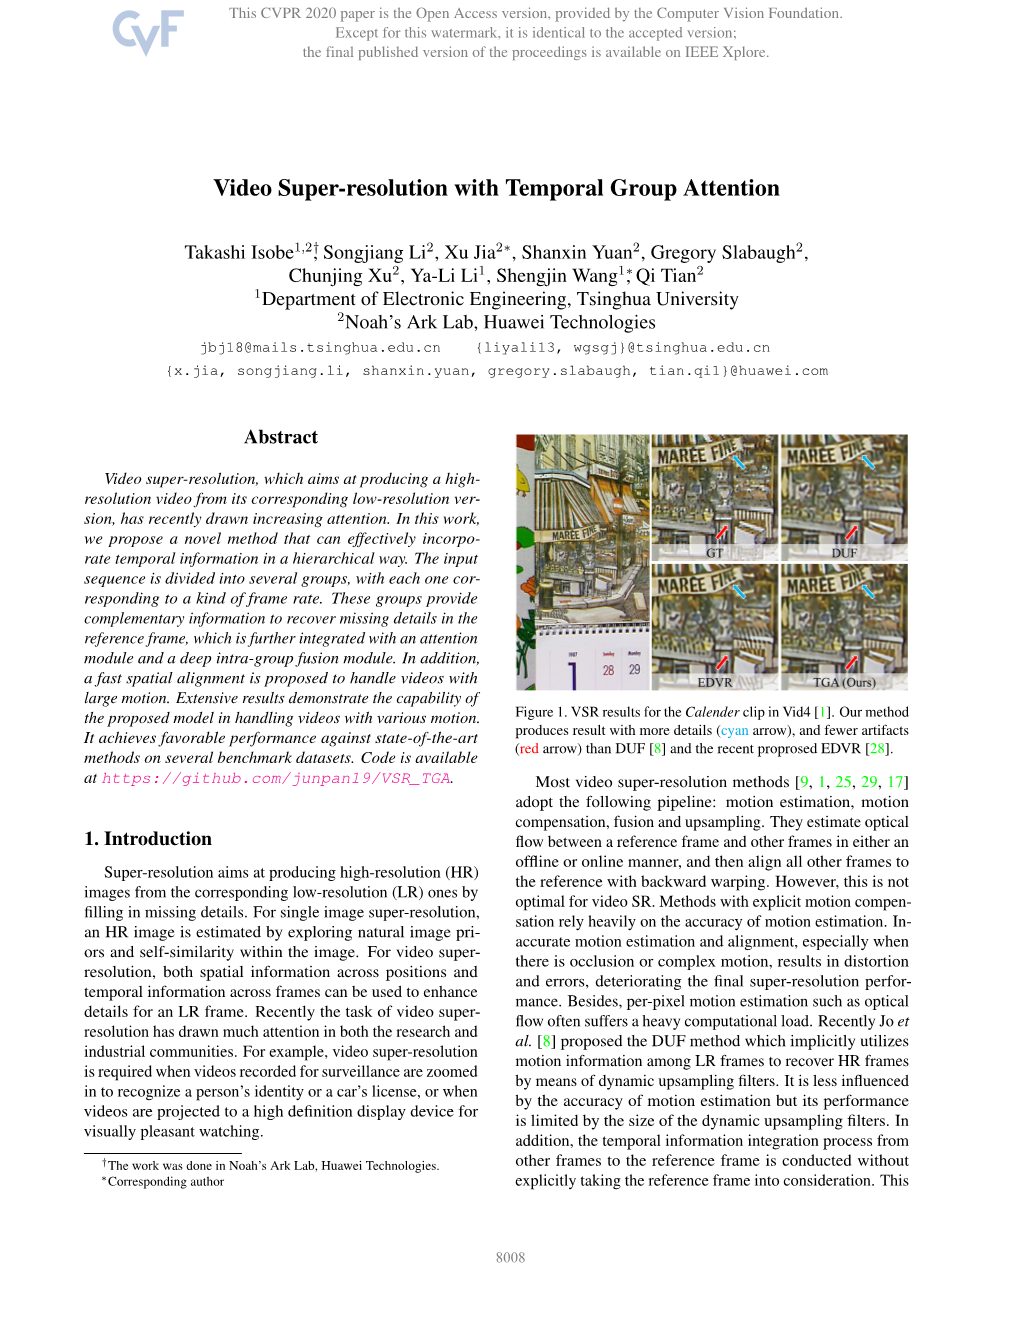 Video Super-Resolution with Temporal Group Attention